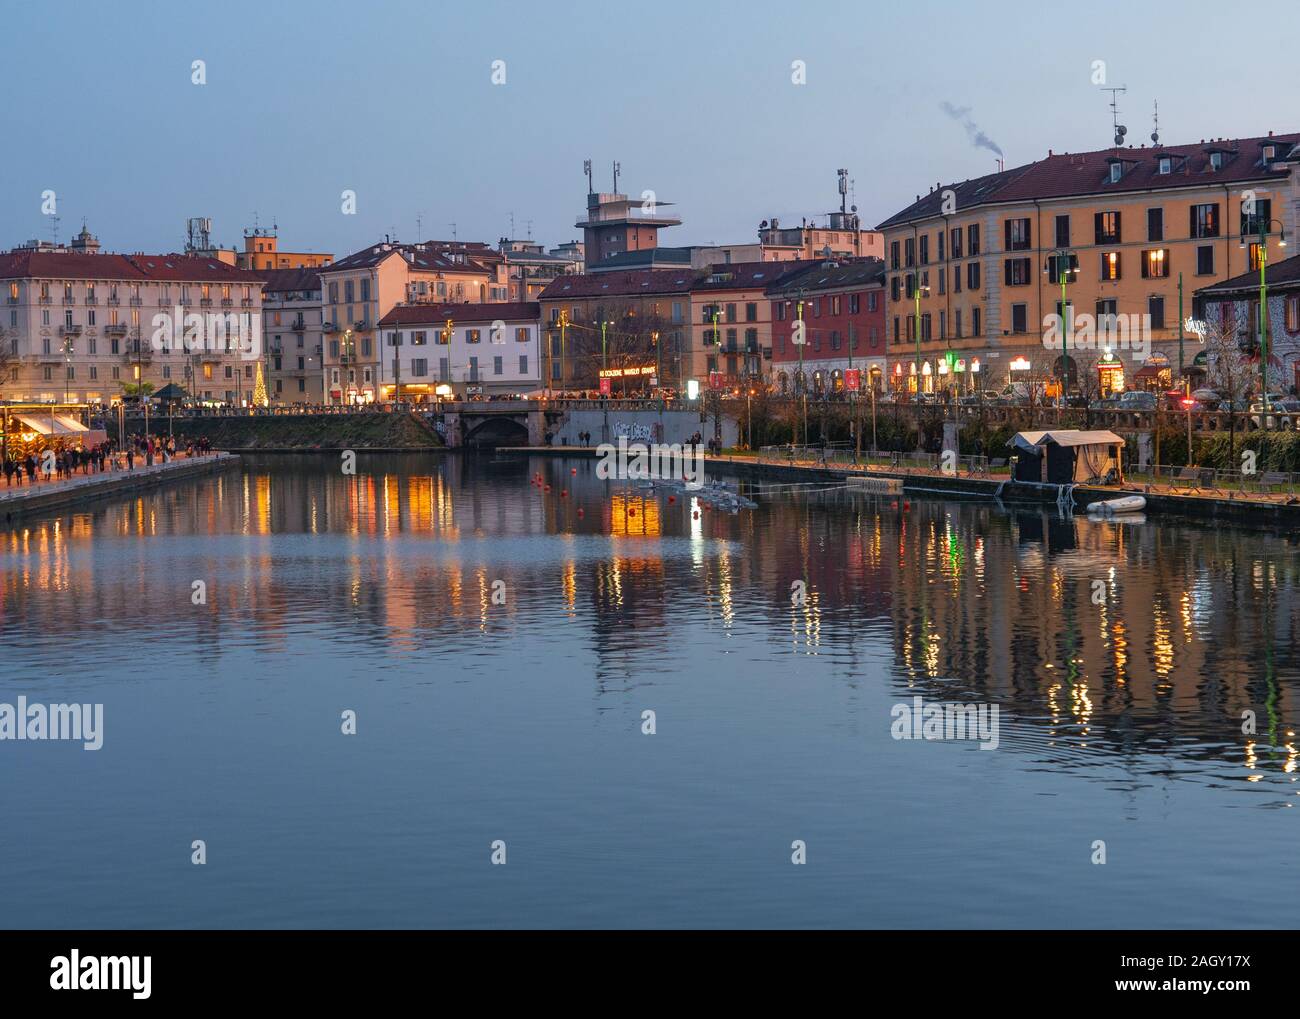 the houses of the characteristic Navigli district are reflected in the dock (Darsena) after sunset.Milan - Italy Stock Photo